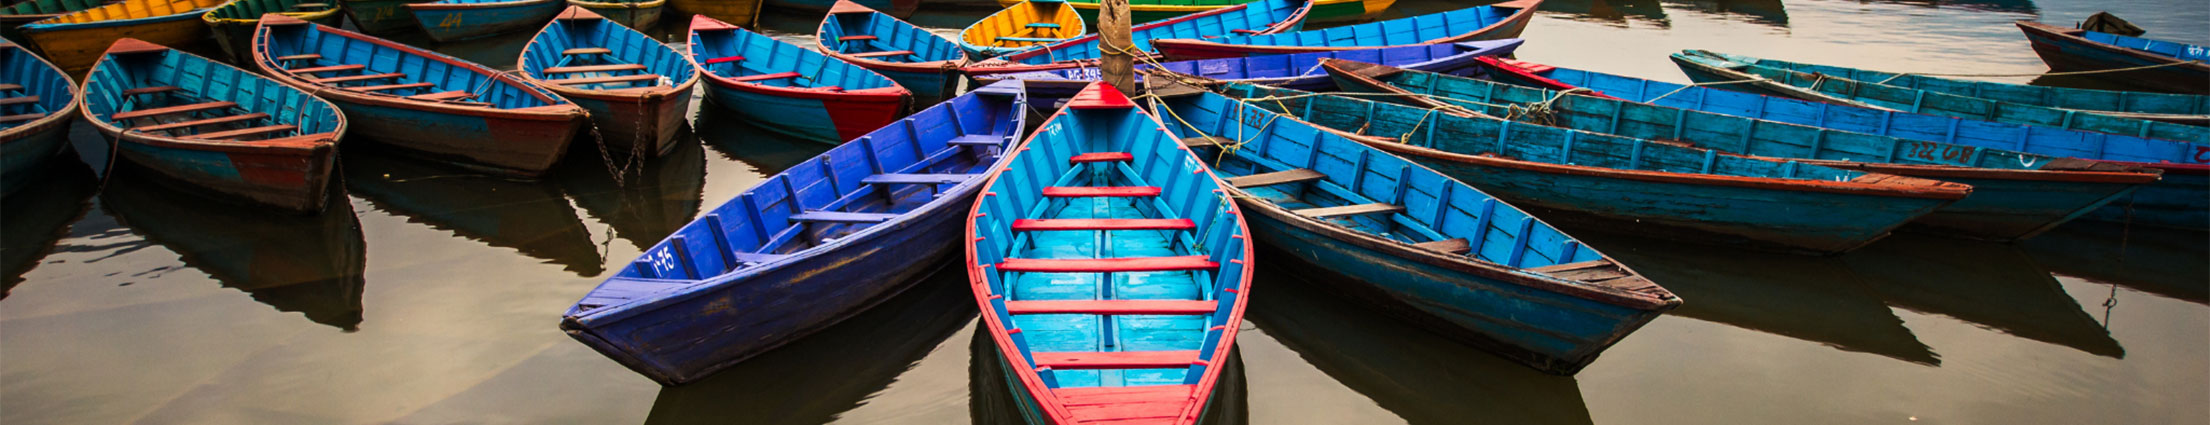 A line of blue and other multicolored boats sitting in water.